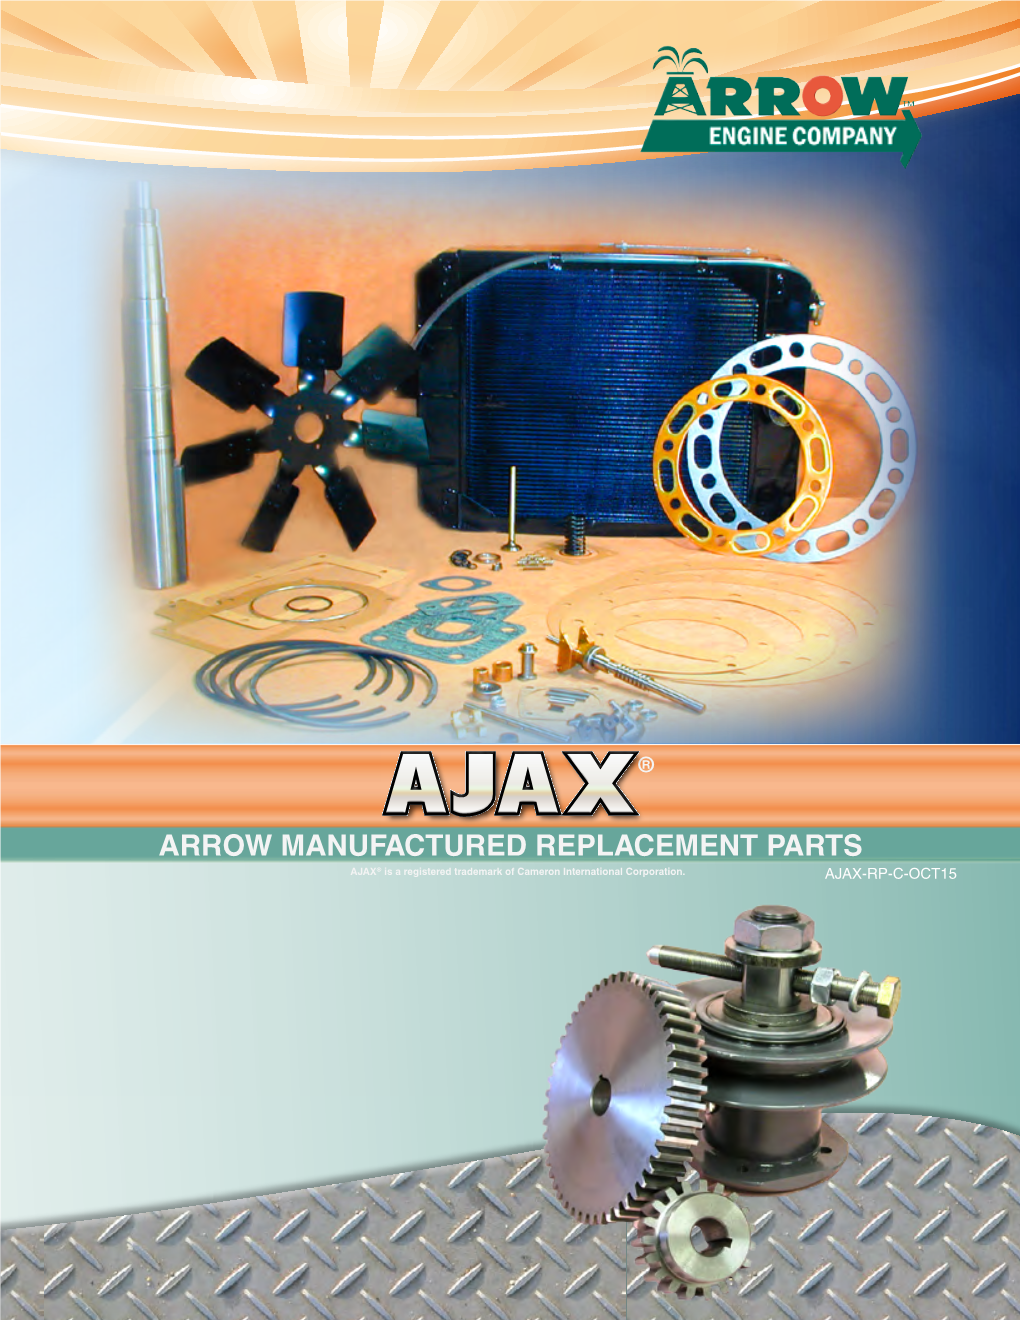 ARROW MANUFACTURED REPLACEMENT PARTS AJAX® Is a Registered Trademark of Cameron International Corporation